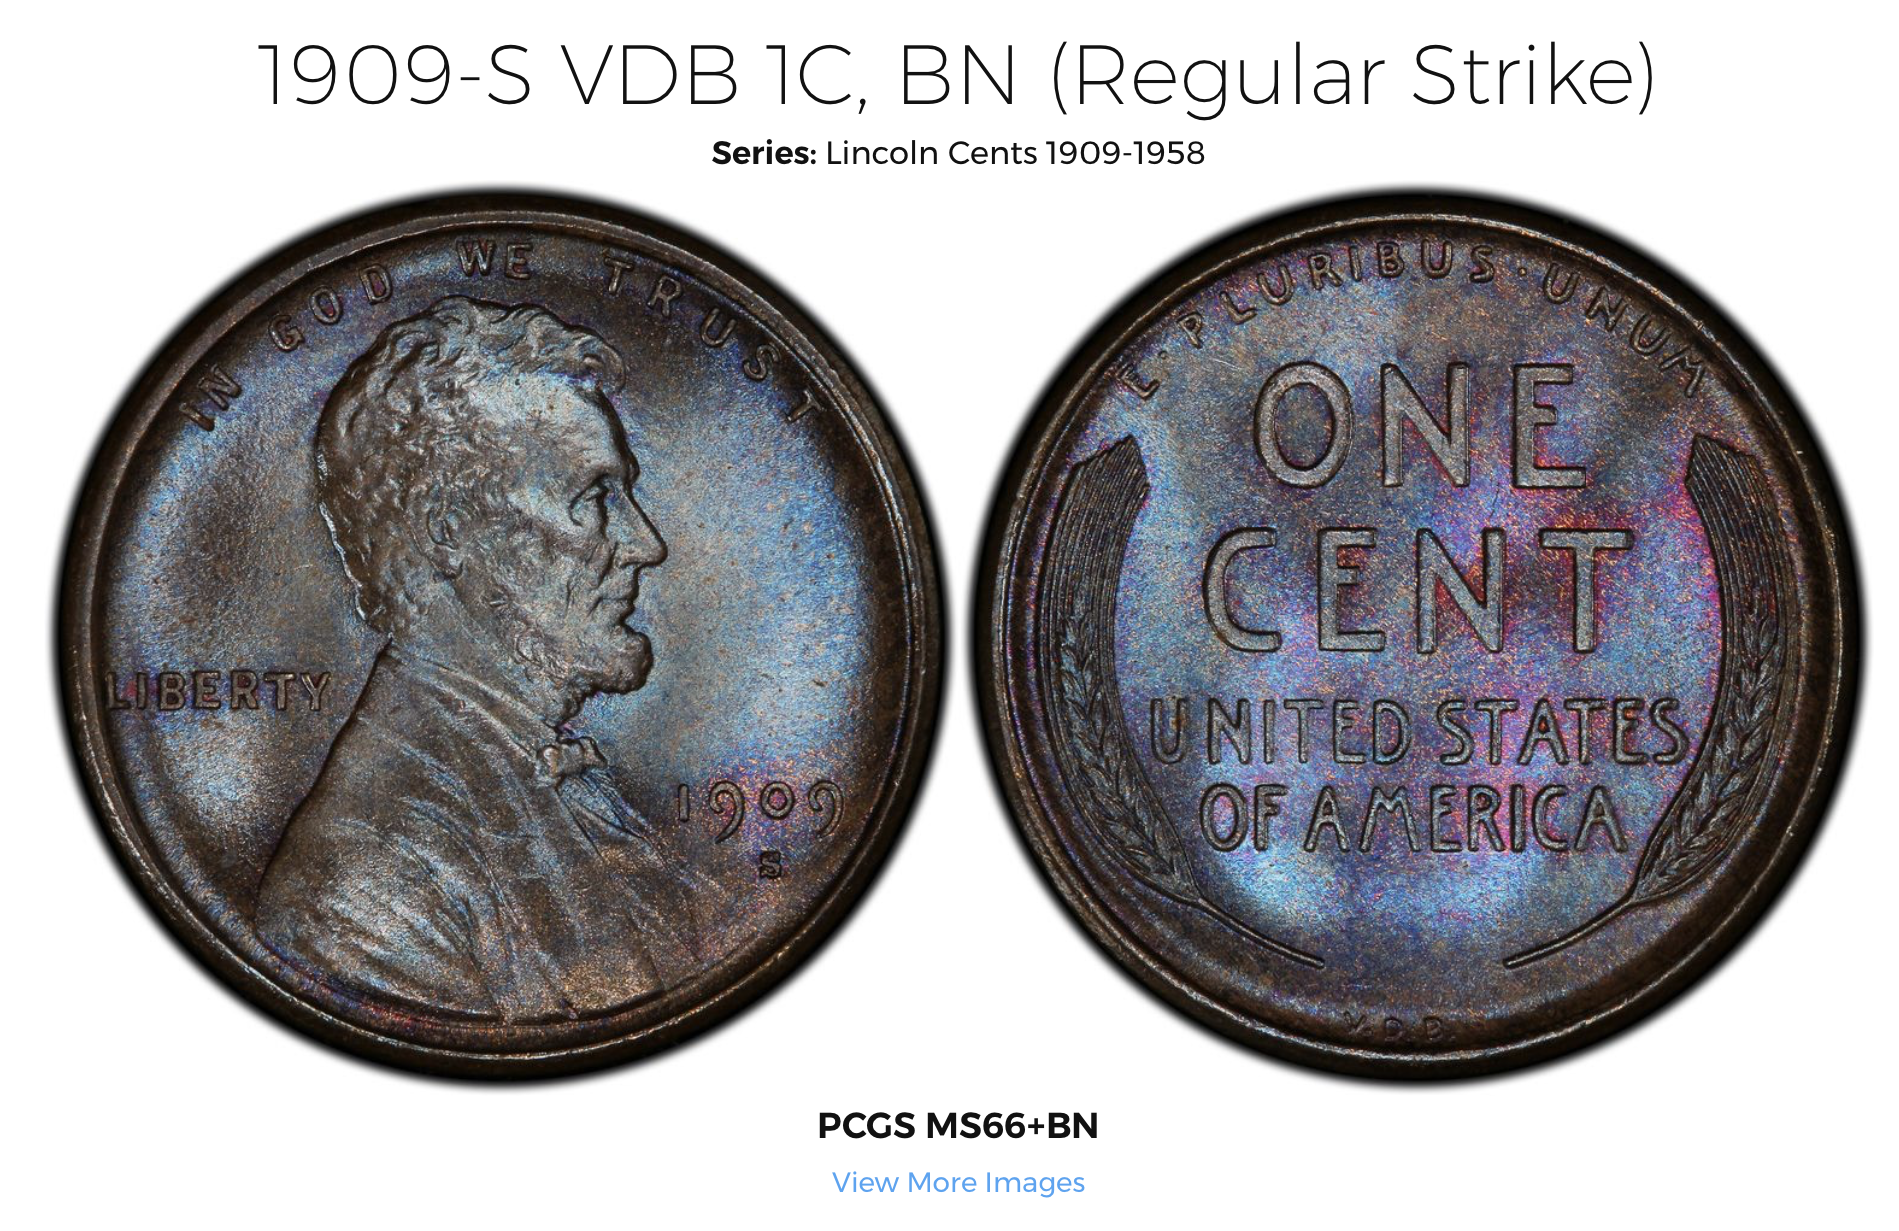 Lincoln cent value